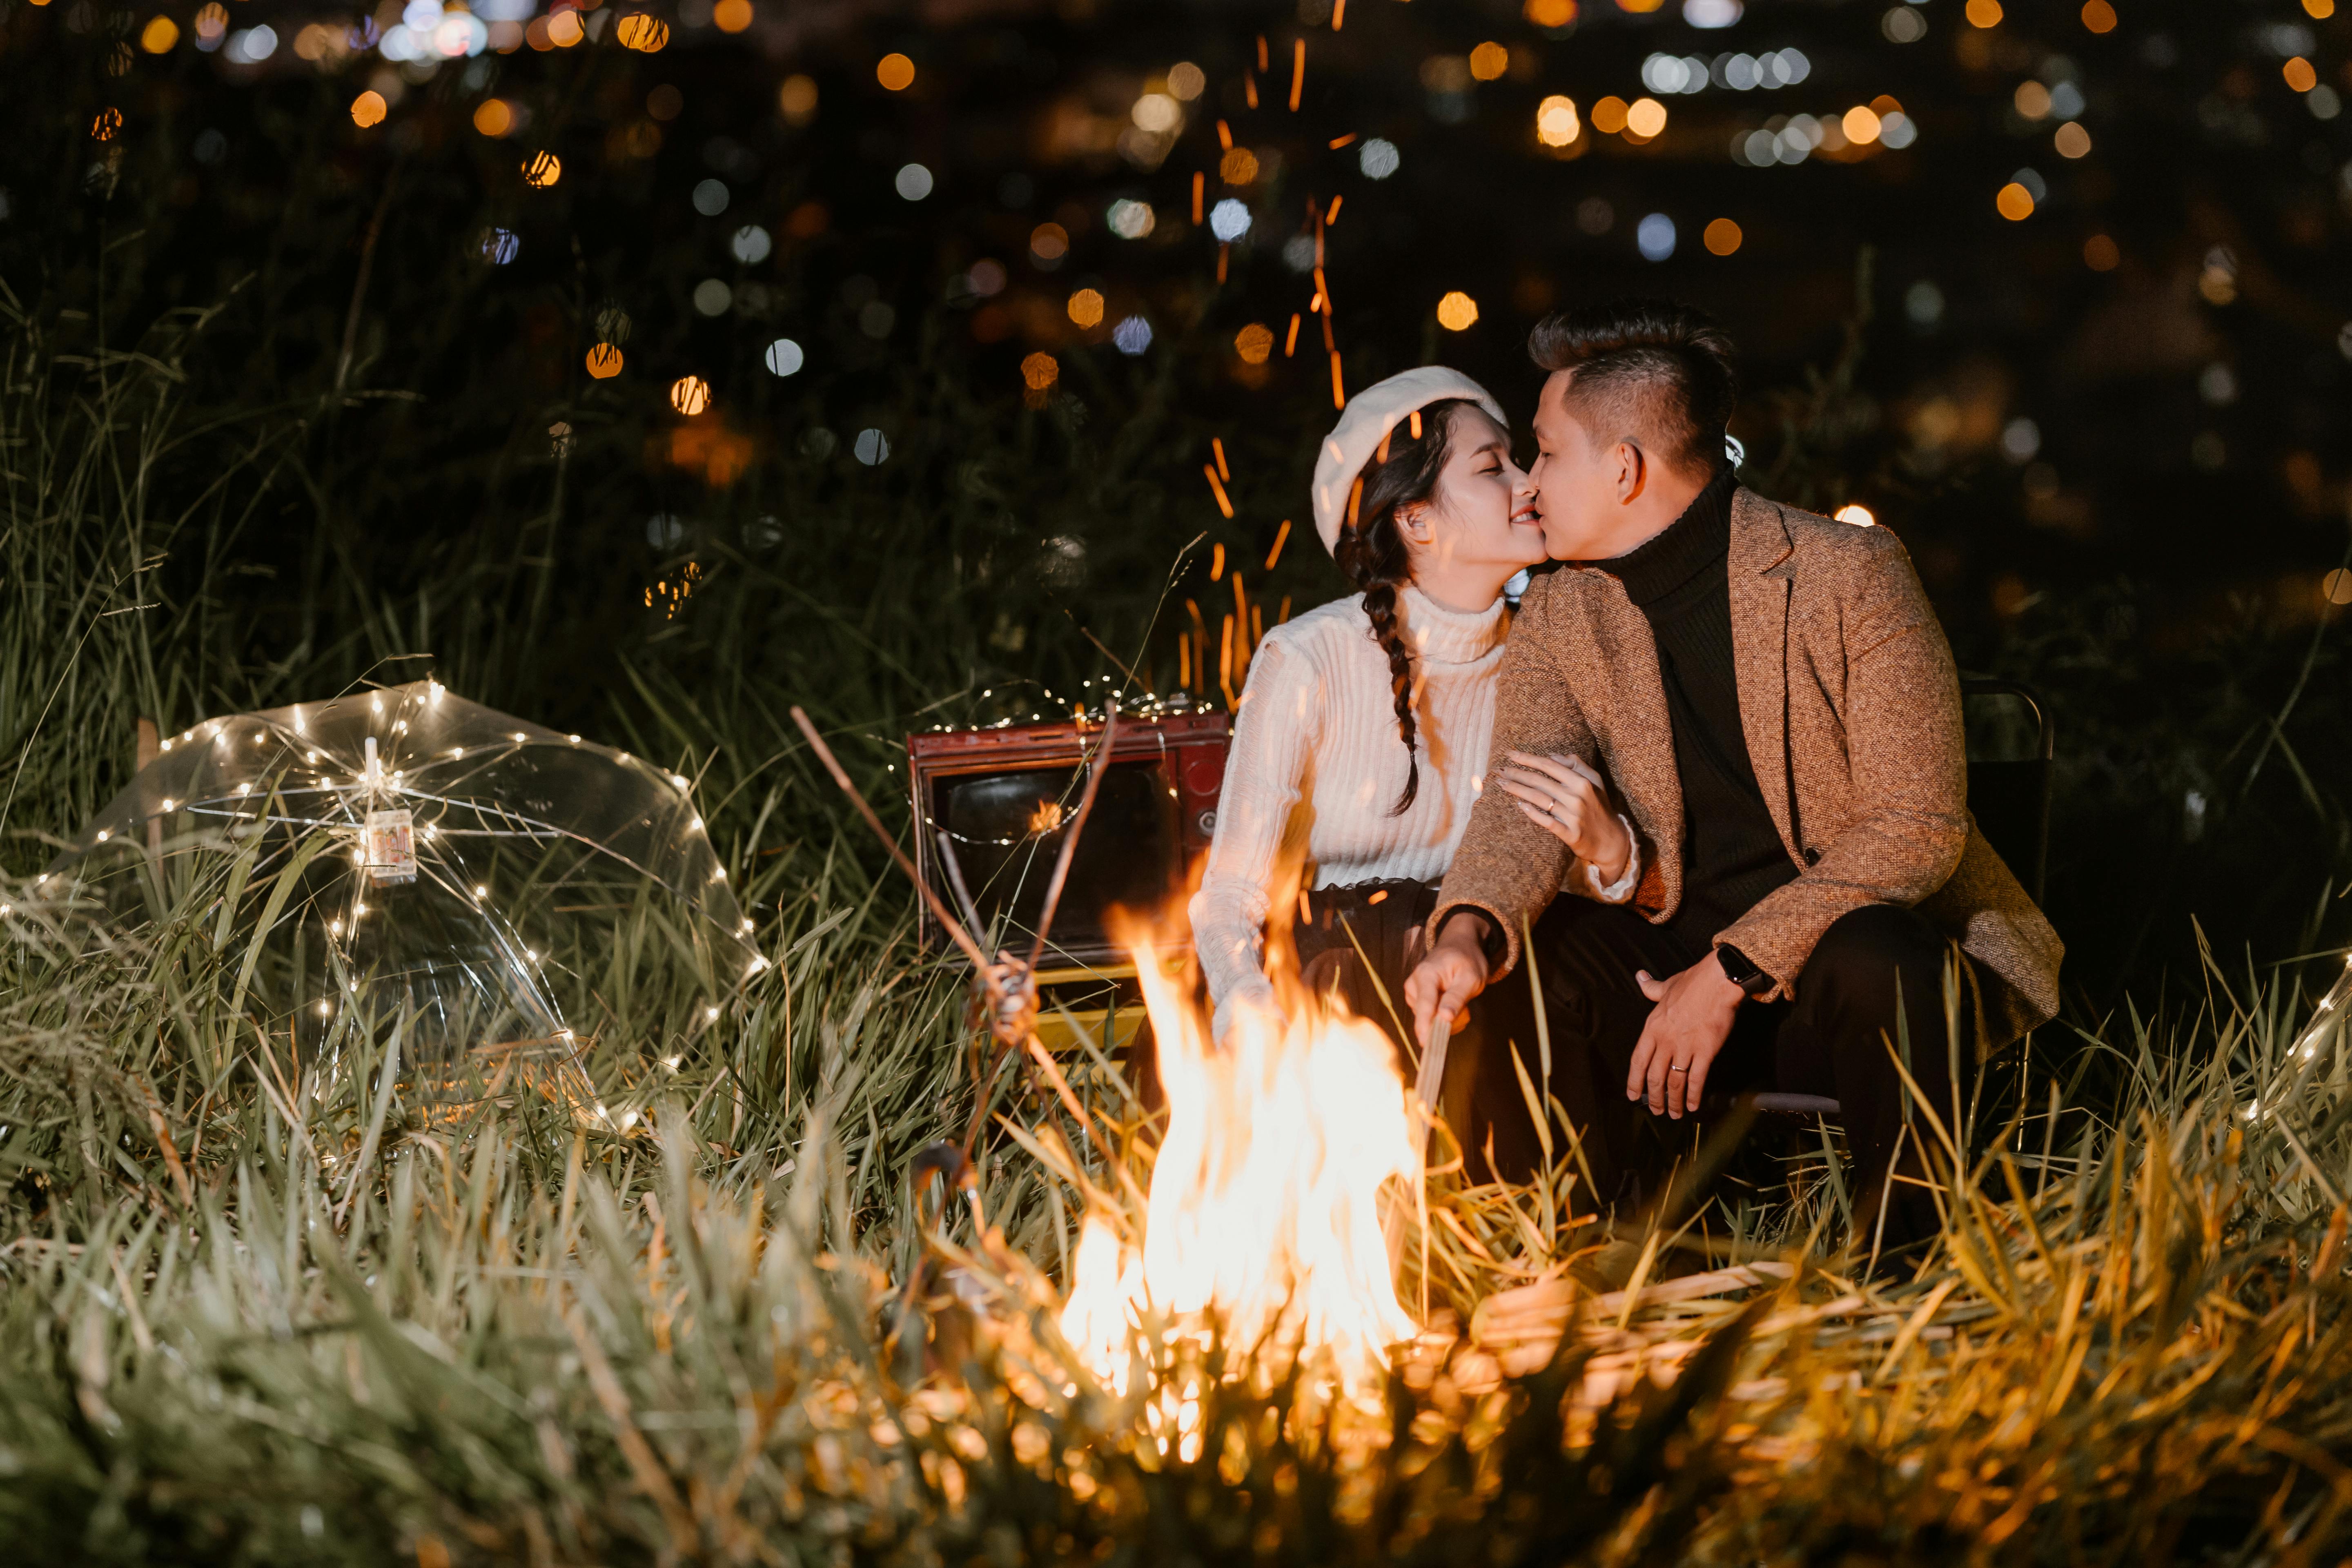 A couple kissing under the moonlight with a fire burning | Source: Pexels